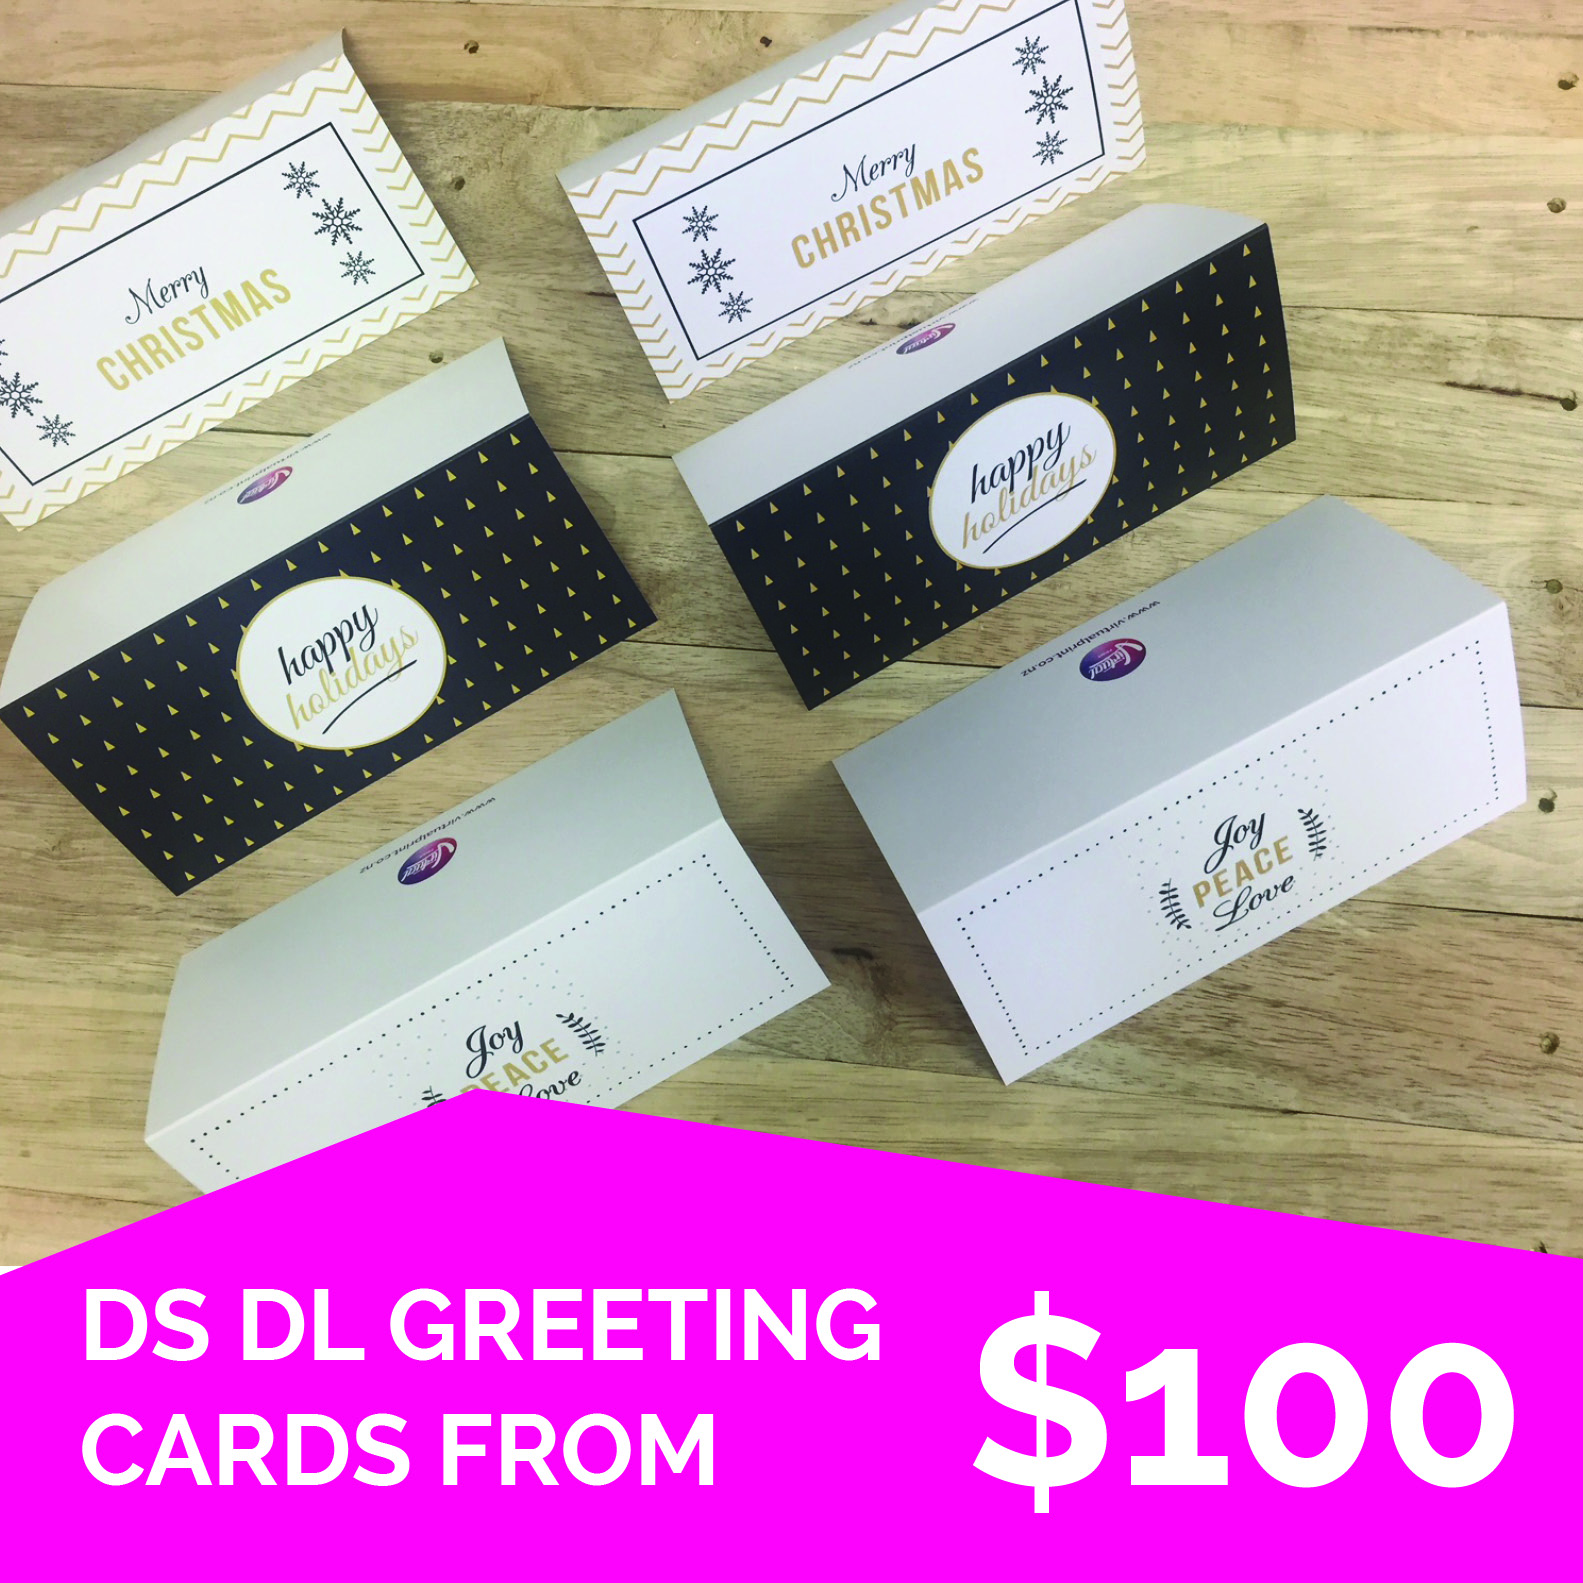 virtual-print-online-printer-double-sided-dle-greeting-cards